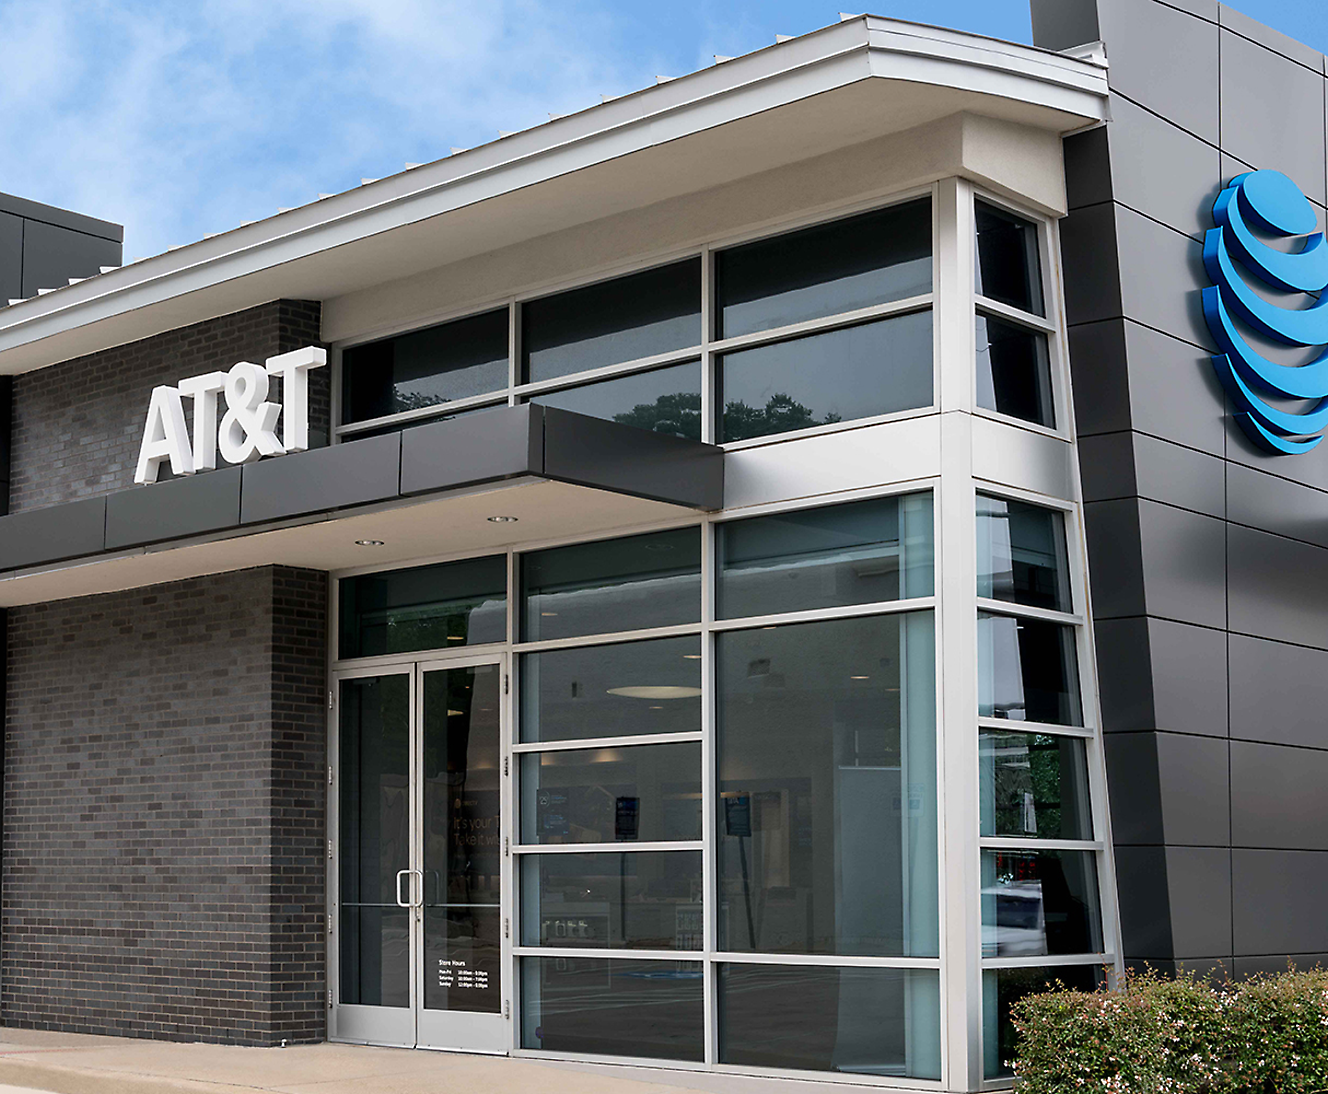 Exterior view of an AT&T store with glass windows and a prominent AT&T logo on the building.